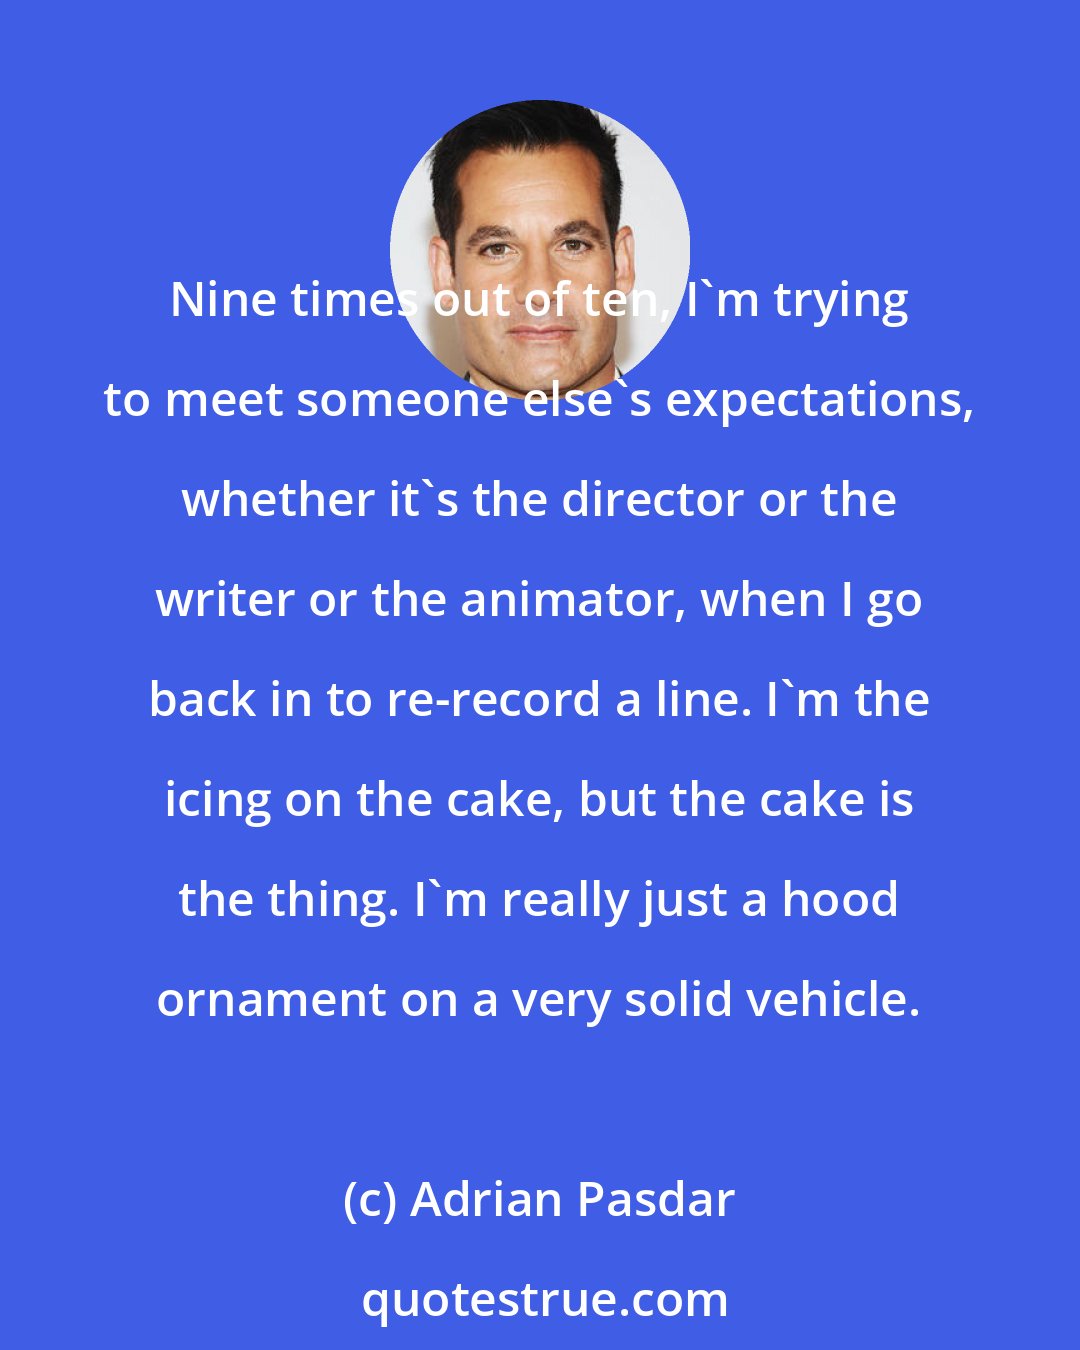 Adrian Pasdar: Nine times out of ten, I'm trying to meet someone else's expectations, whether it's the director or the writer or the animator, when I go back in to re-record a line. I'm the icing on the cake, but the cake is the thing. I'm really just a hood ornament on a very solid vehicle.